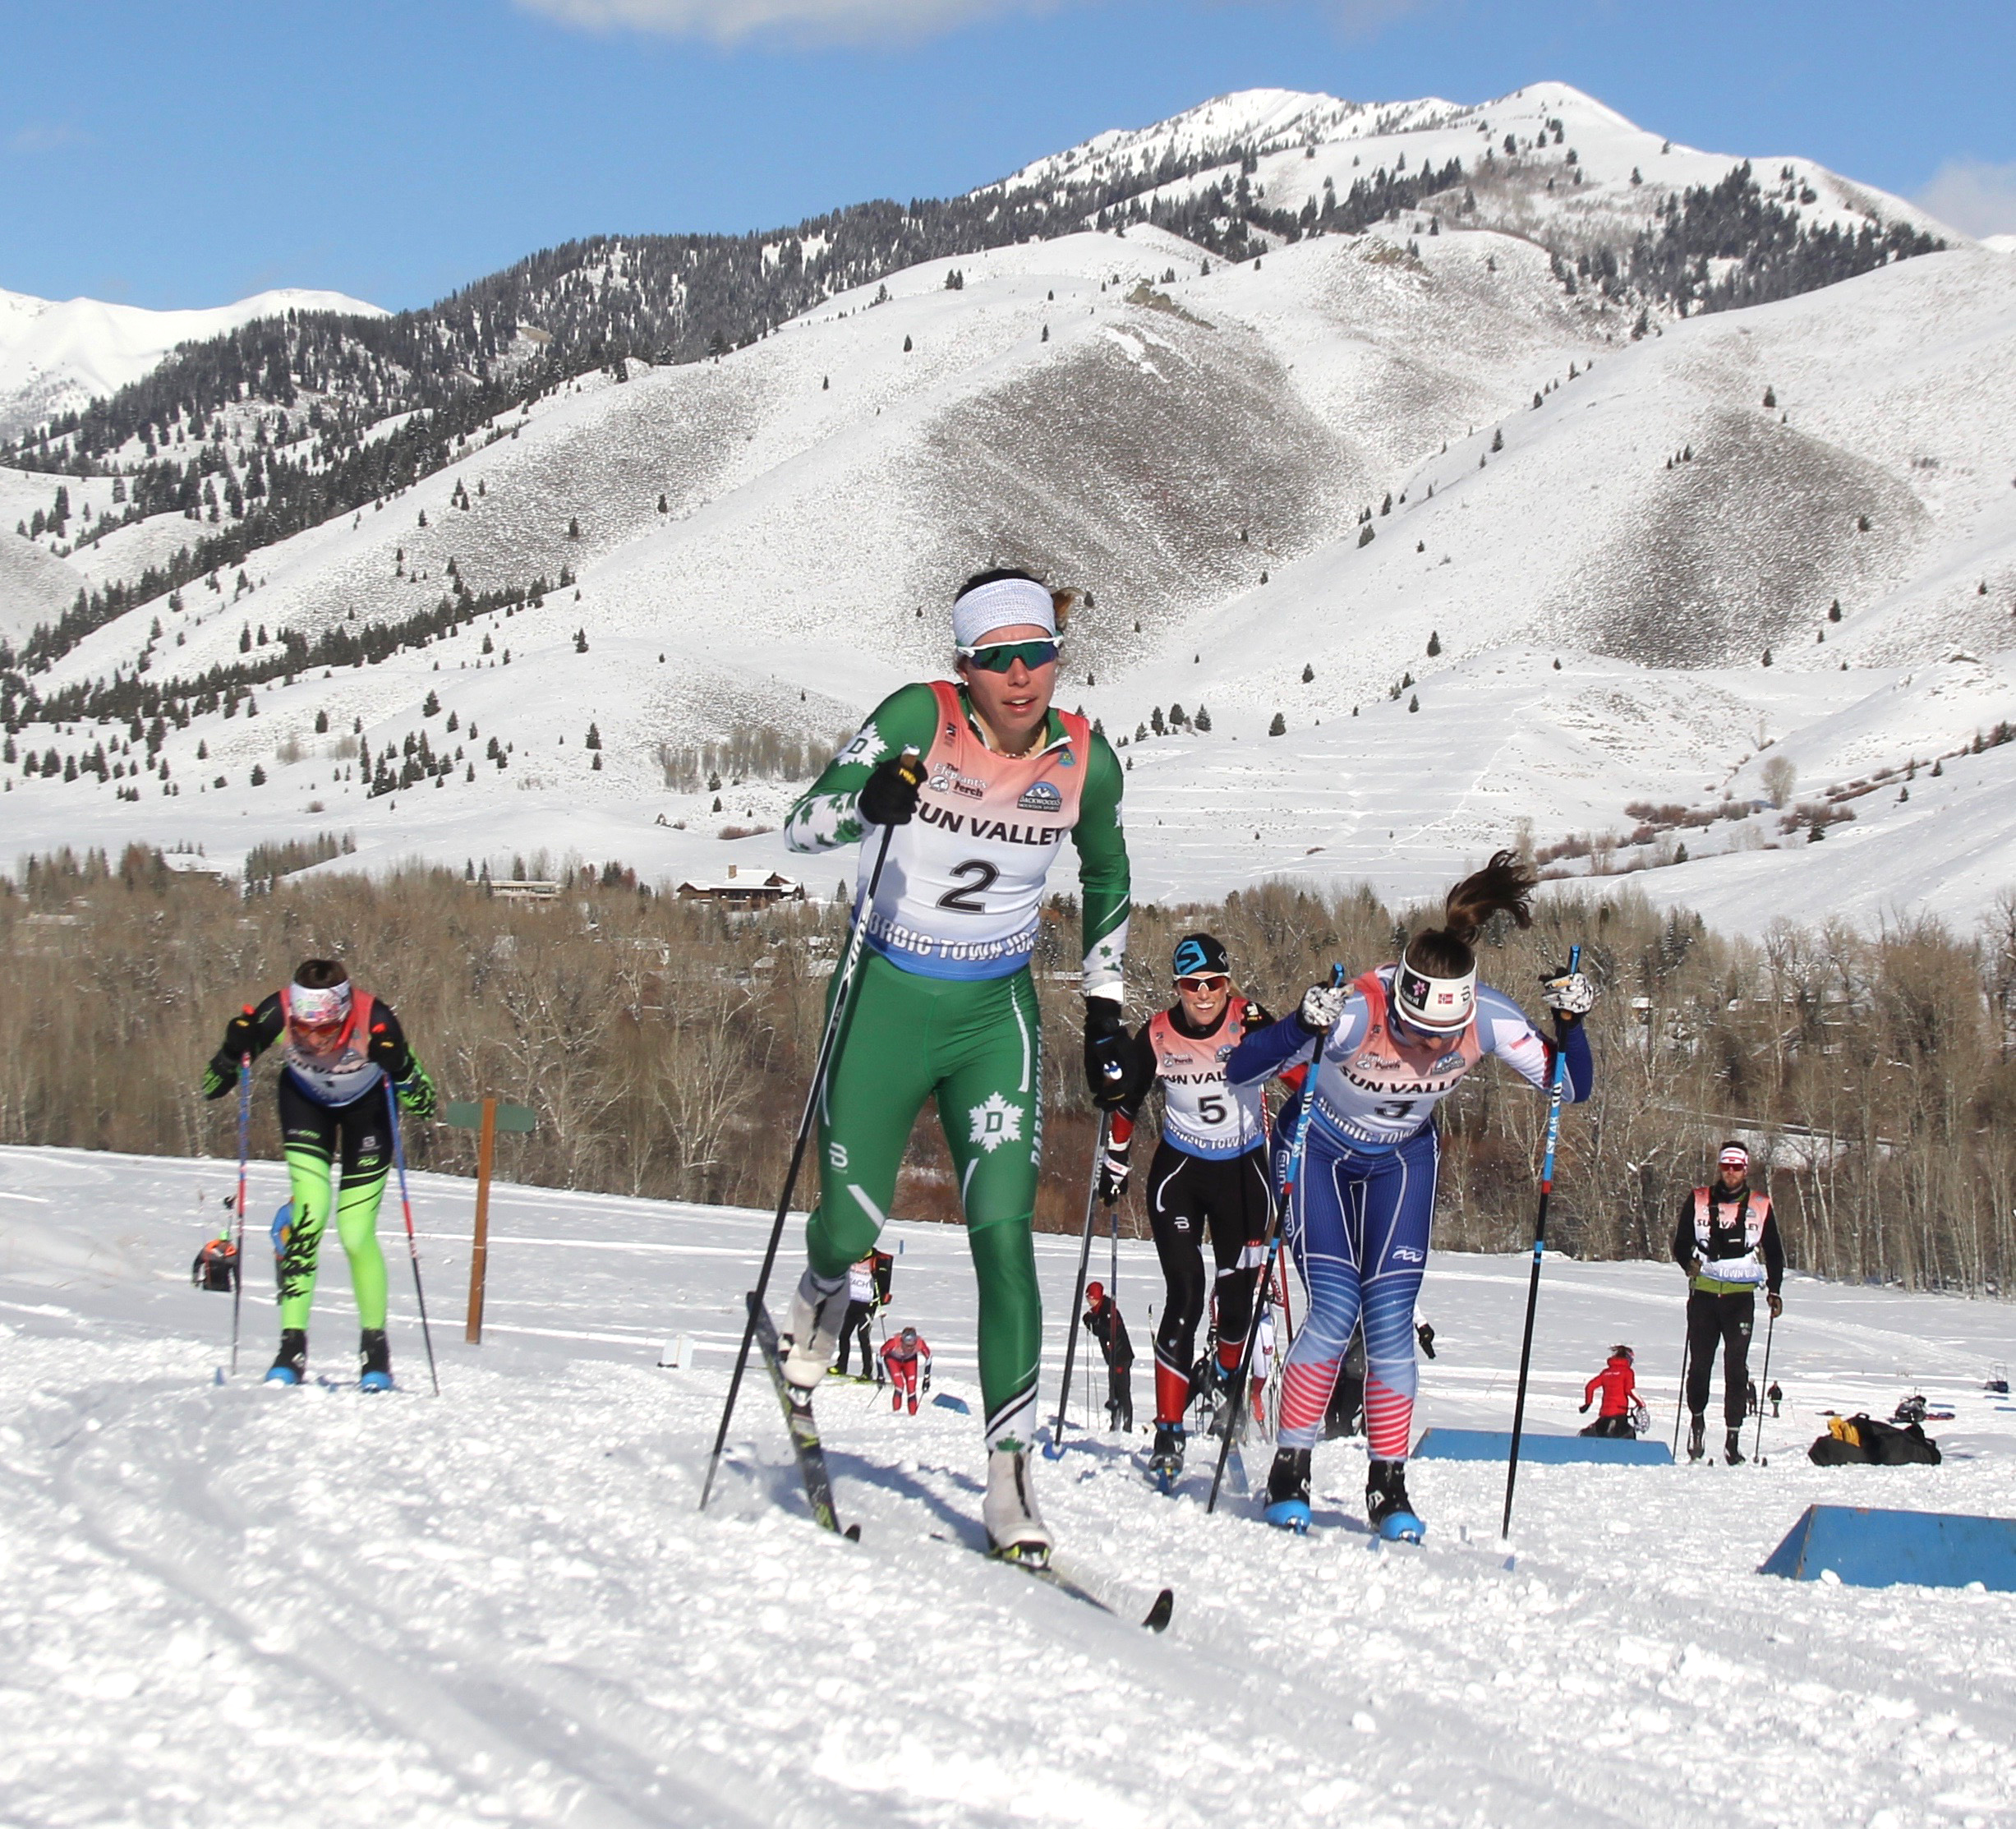 Katherine Ogden leads the women's classic sprint at round 2 of the SuperTour in Sun Valley, Idaho. 